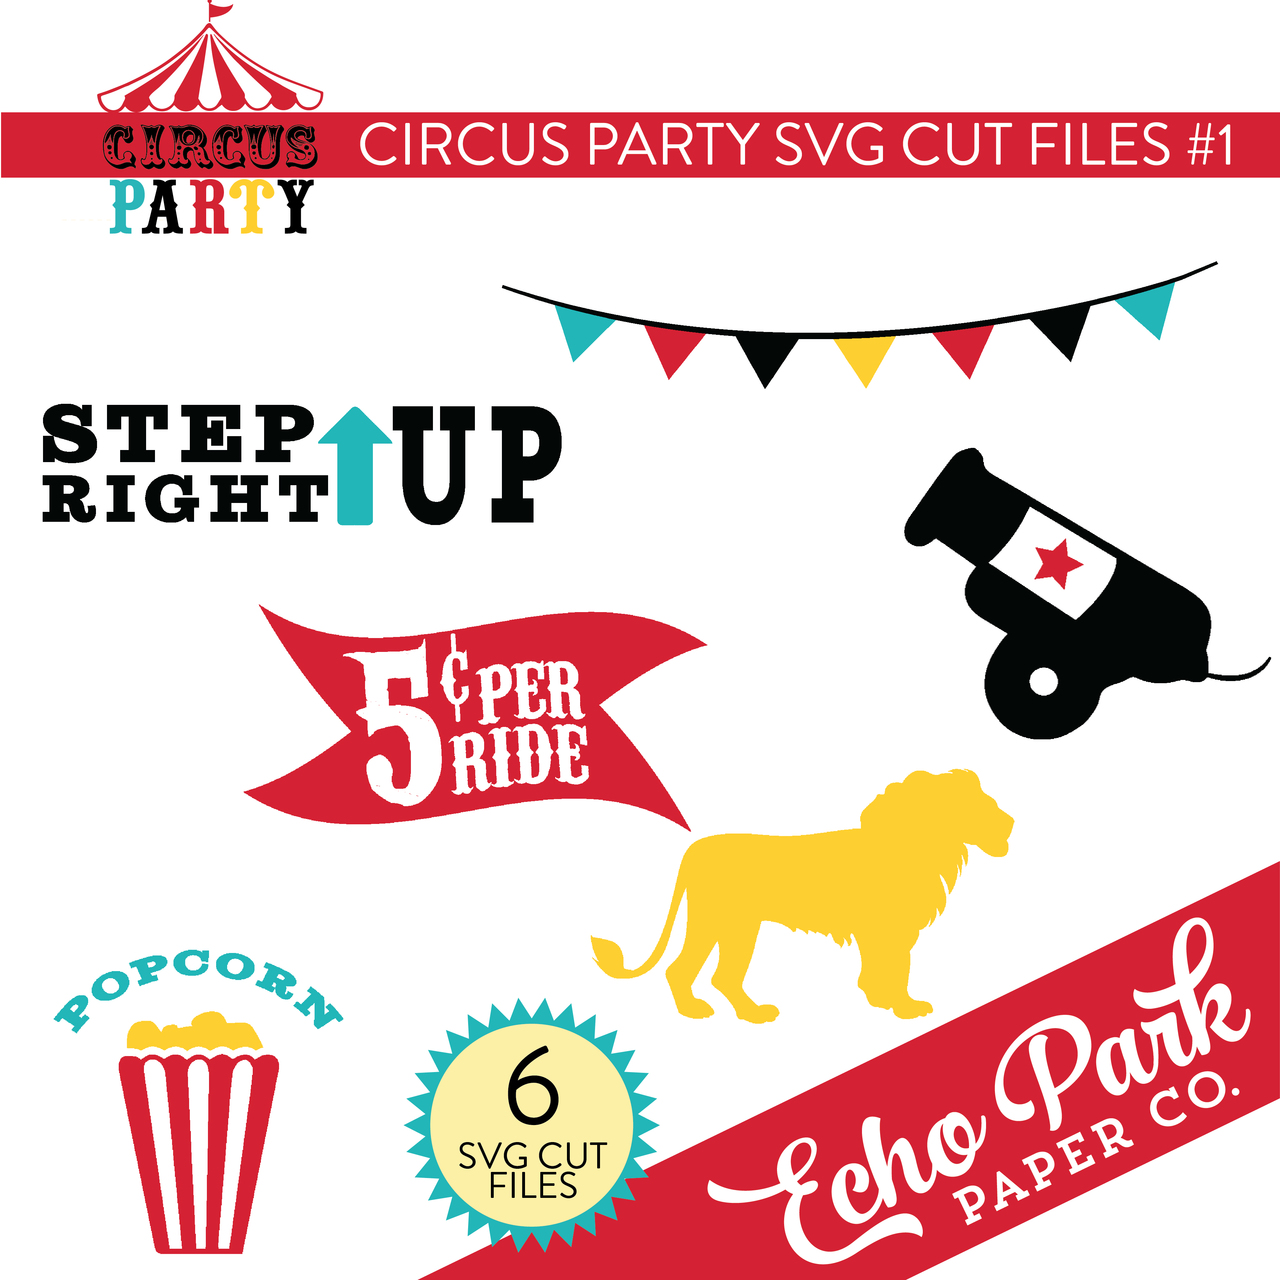 Circus Party SVG Cut Files #1